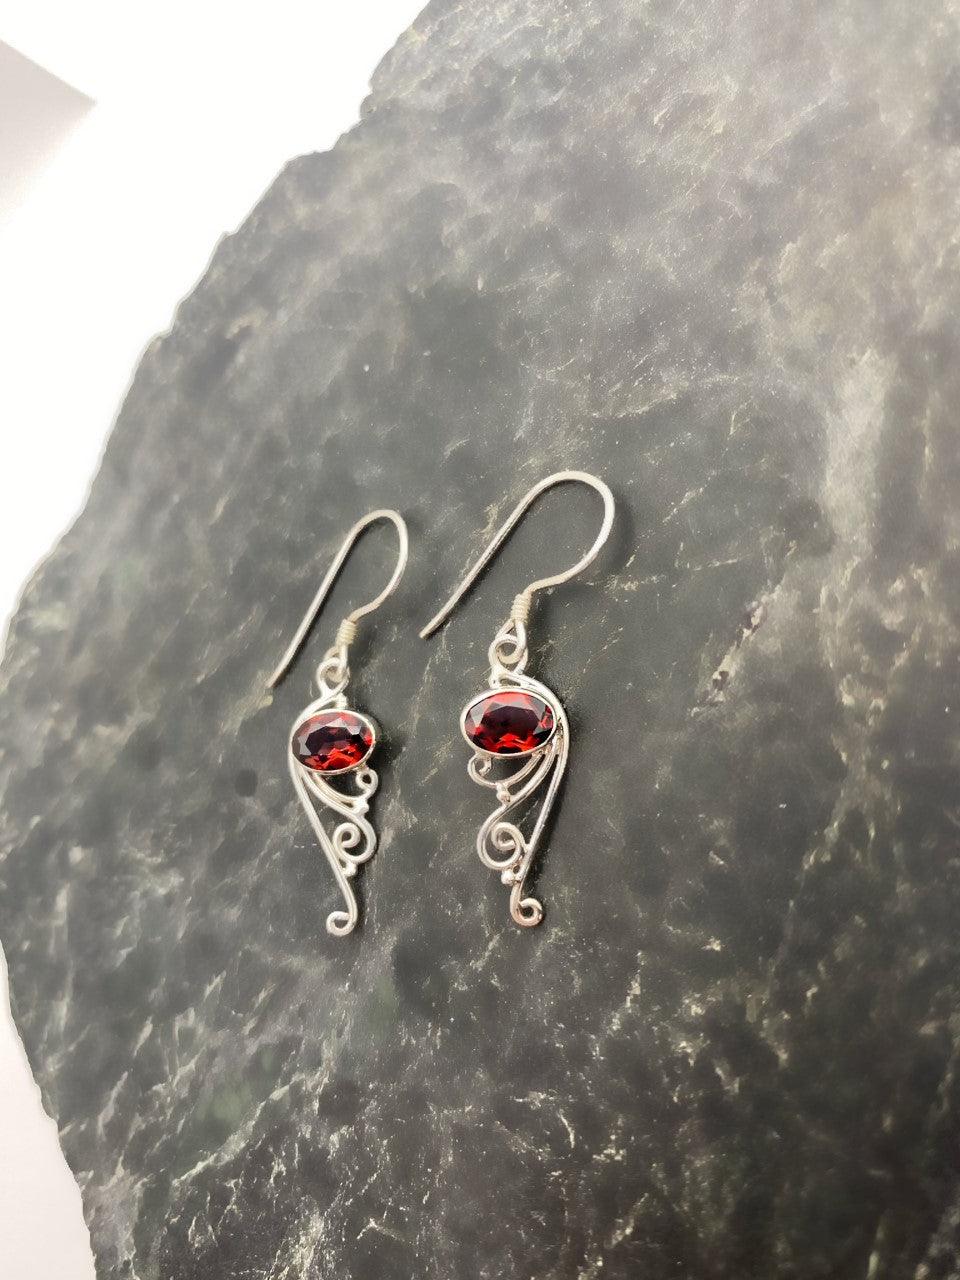 Sterling silver drop earrings on a French wire with an Garnet stone at the top and filigree design at the bottom.